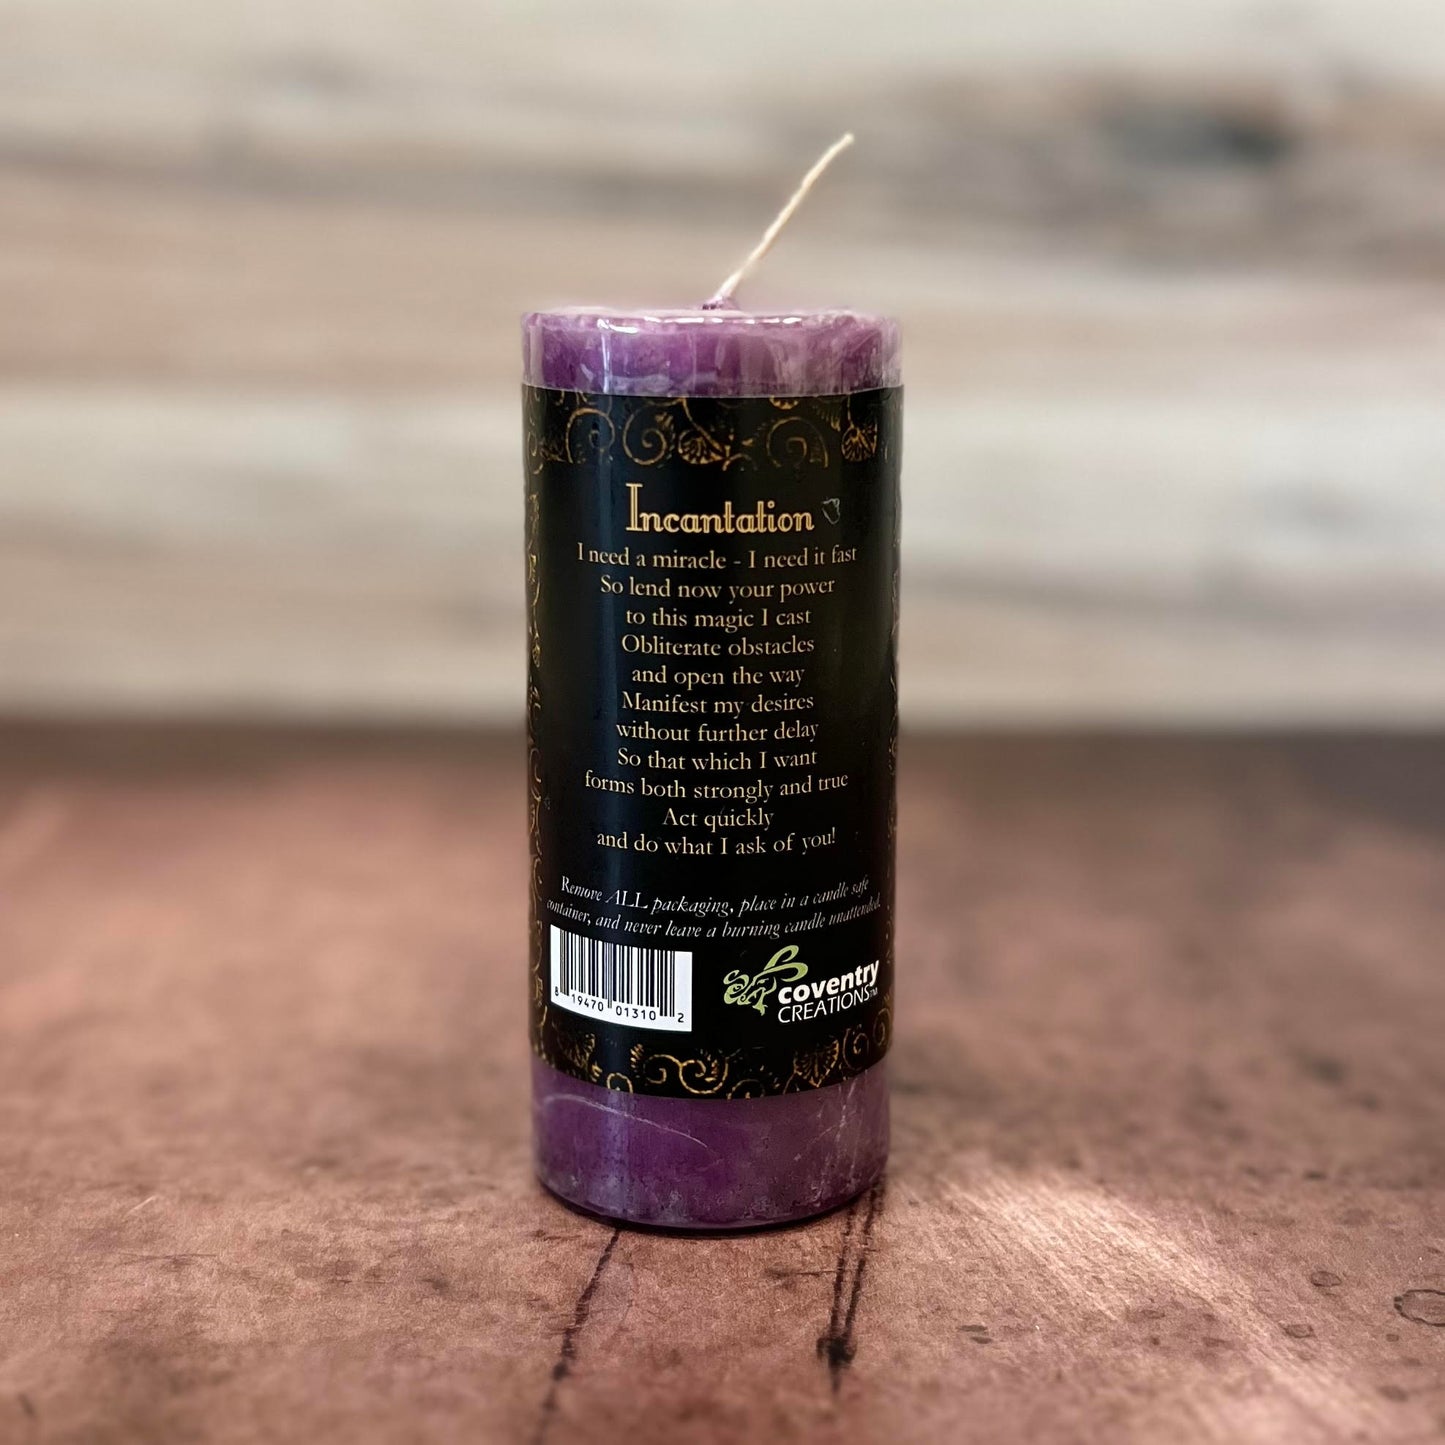 Saint Dorothy The Wicked The Magical Miracle Worker Candle Limited Edition